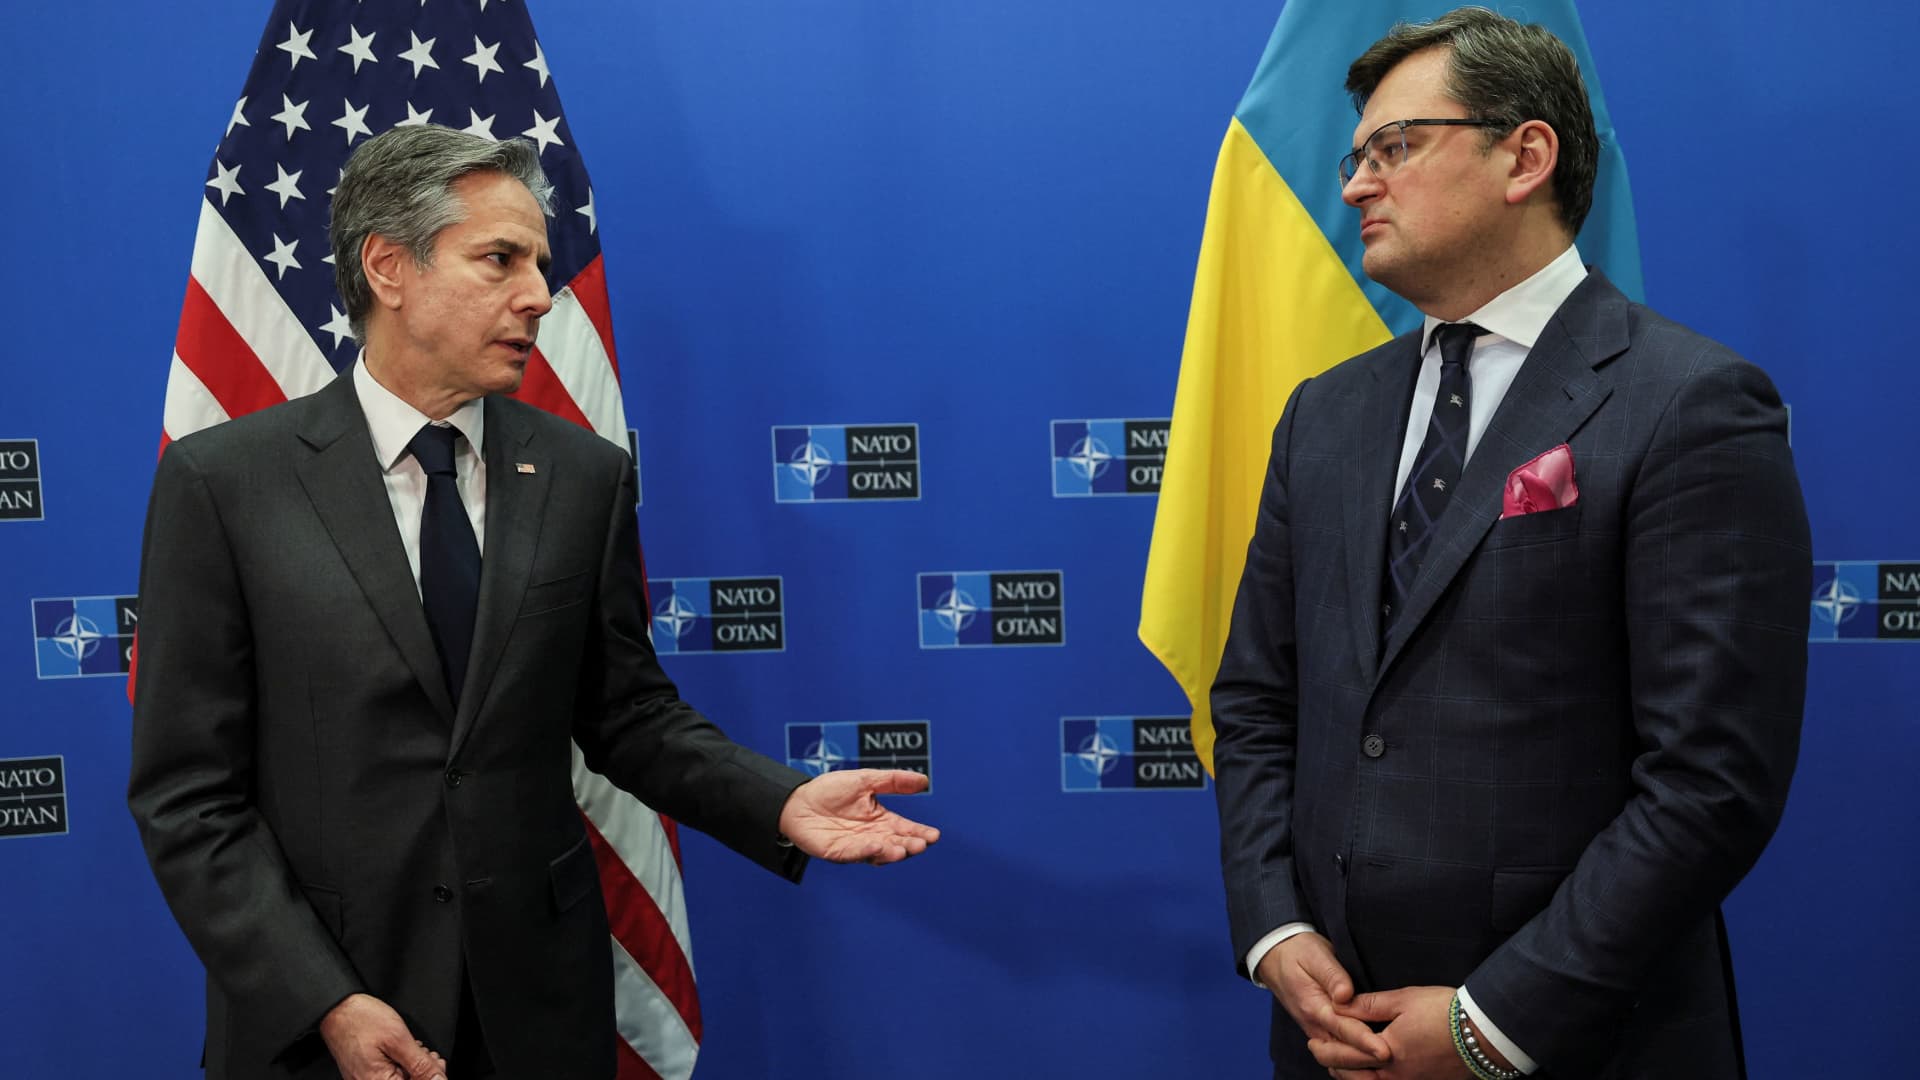 U.S. Secretary of State Antony Blinken and Ukrainian Foreign Minister Dmytro Kuleba deliver remarks after a NATO foreign ministers meeting, amid Russia's invasion of Ukraine, at NATO headquarters in Brussels, Belgium April 7, 2022. 